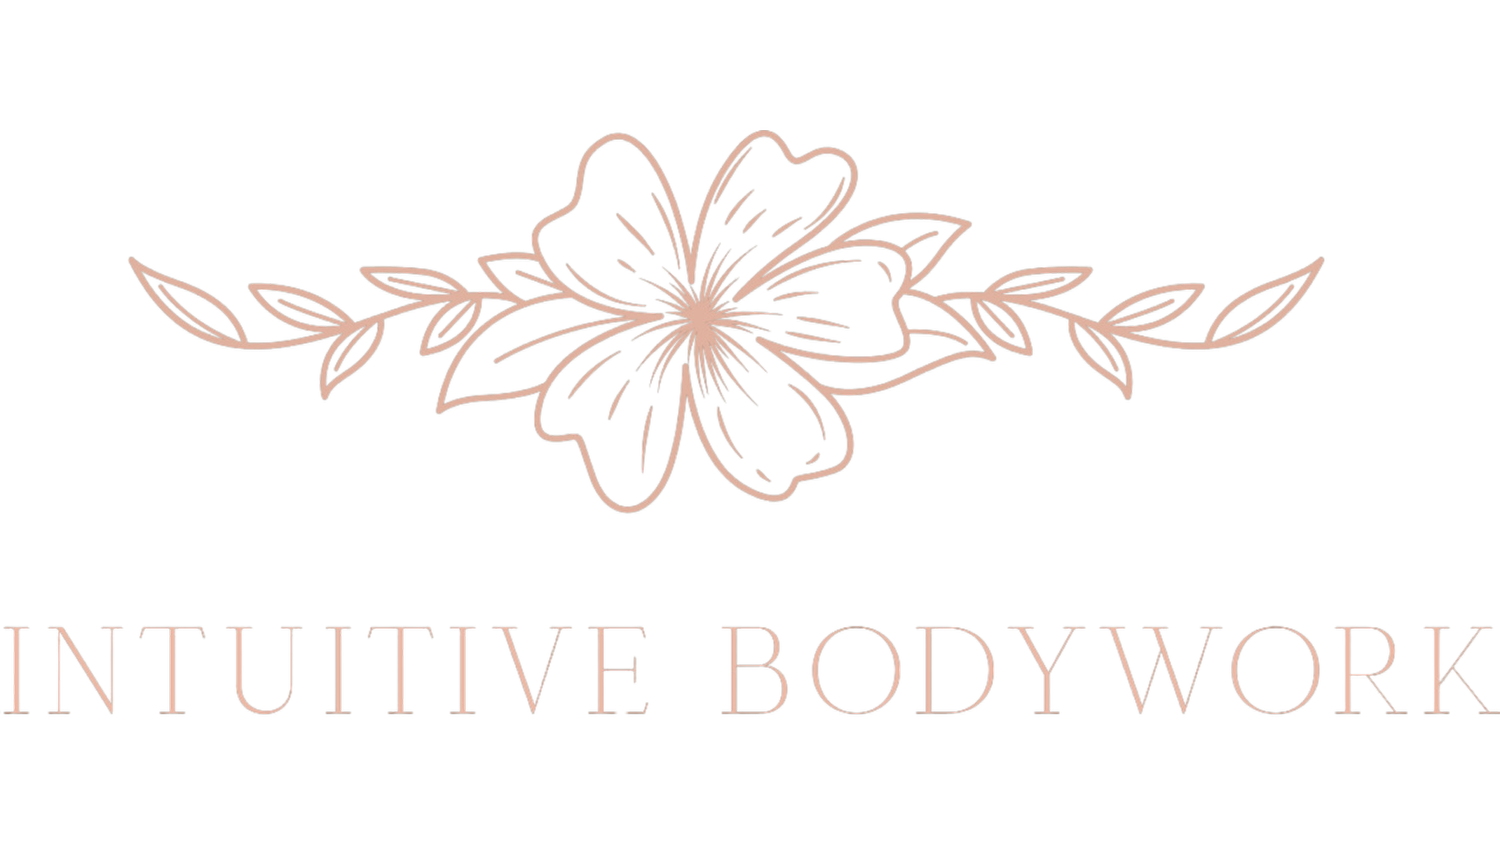 Intuitive Body Work